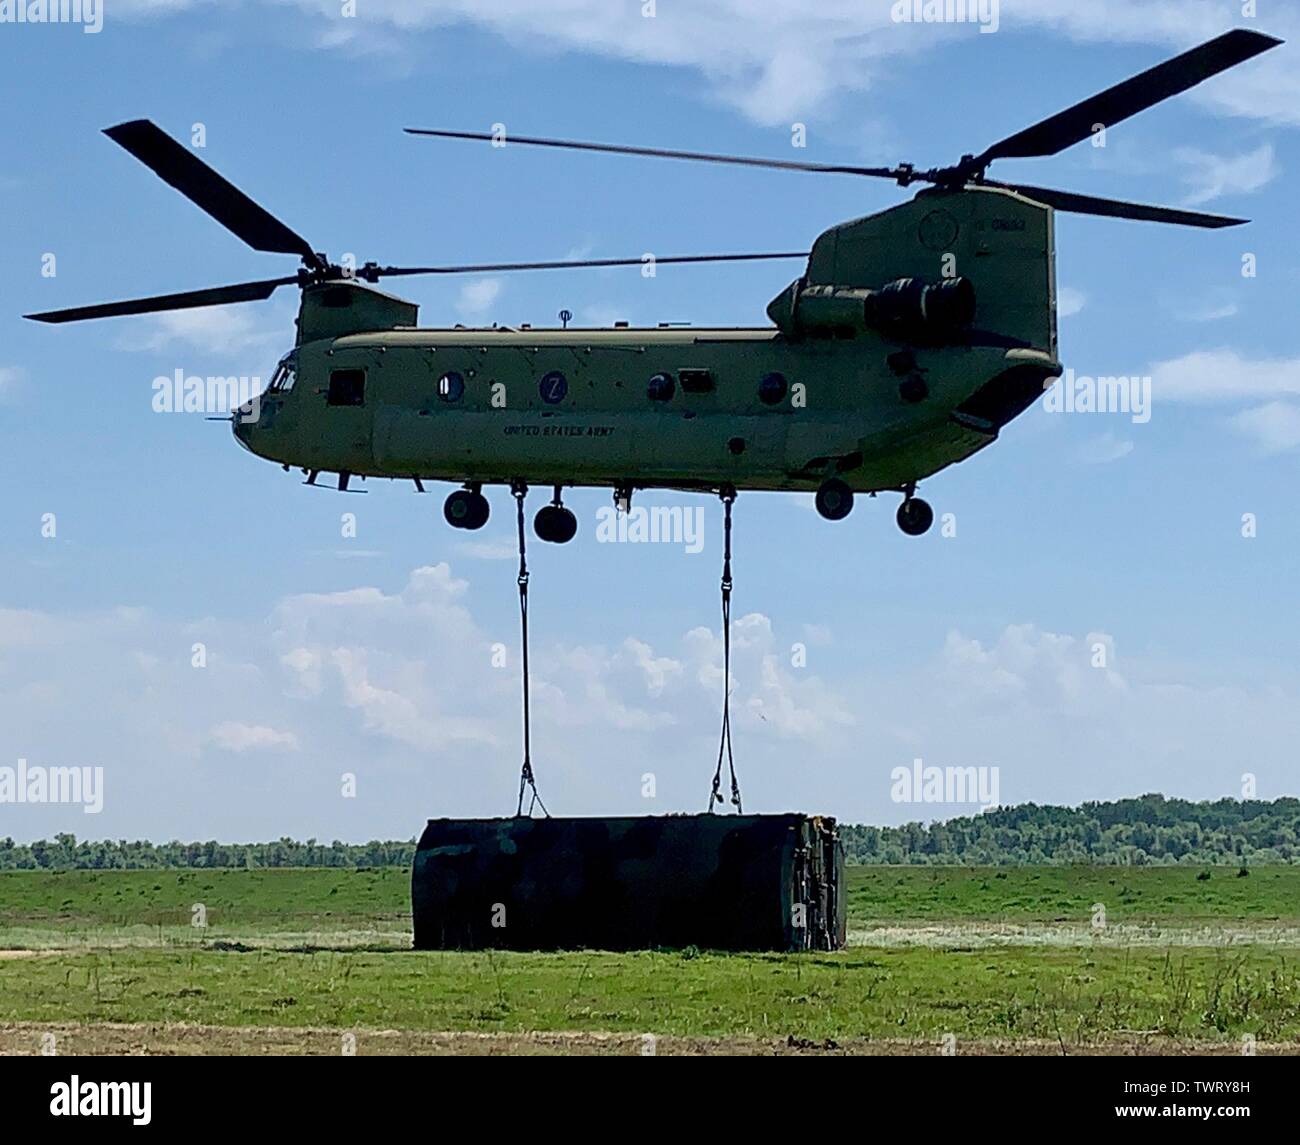 A U.S. Army CH-47 Chinook from the 12th Combat Aviation Brigade begins to lift a raft section in Bordusani, Romania June 20, 2019 during Saber Guardian 19. Saber Guardian 19 is an exercise co-led by the Romanian Joint Force Command and U.S. Army Europe, taking place from June 3 - 24 at various locations in Bulgaria, Hungary and Romania. Saber Guardian 19 is designed to improve the integration of multinational combat forces. (U.S. Army photo by Cpt. Erica Mitchell) Stock Photo